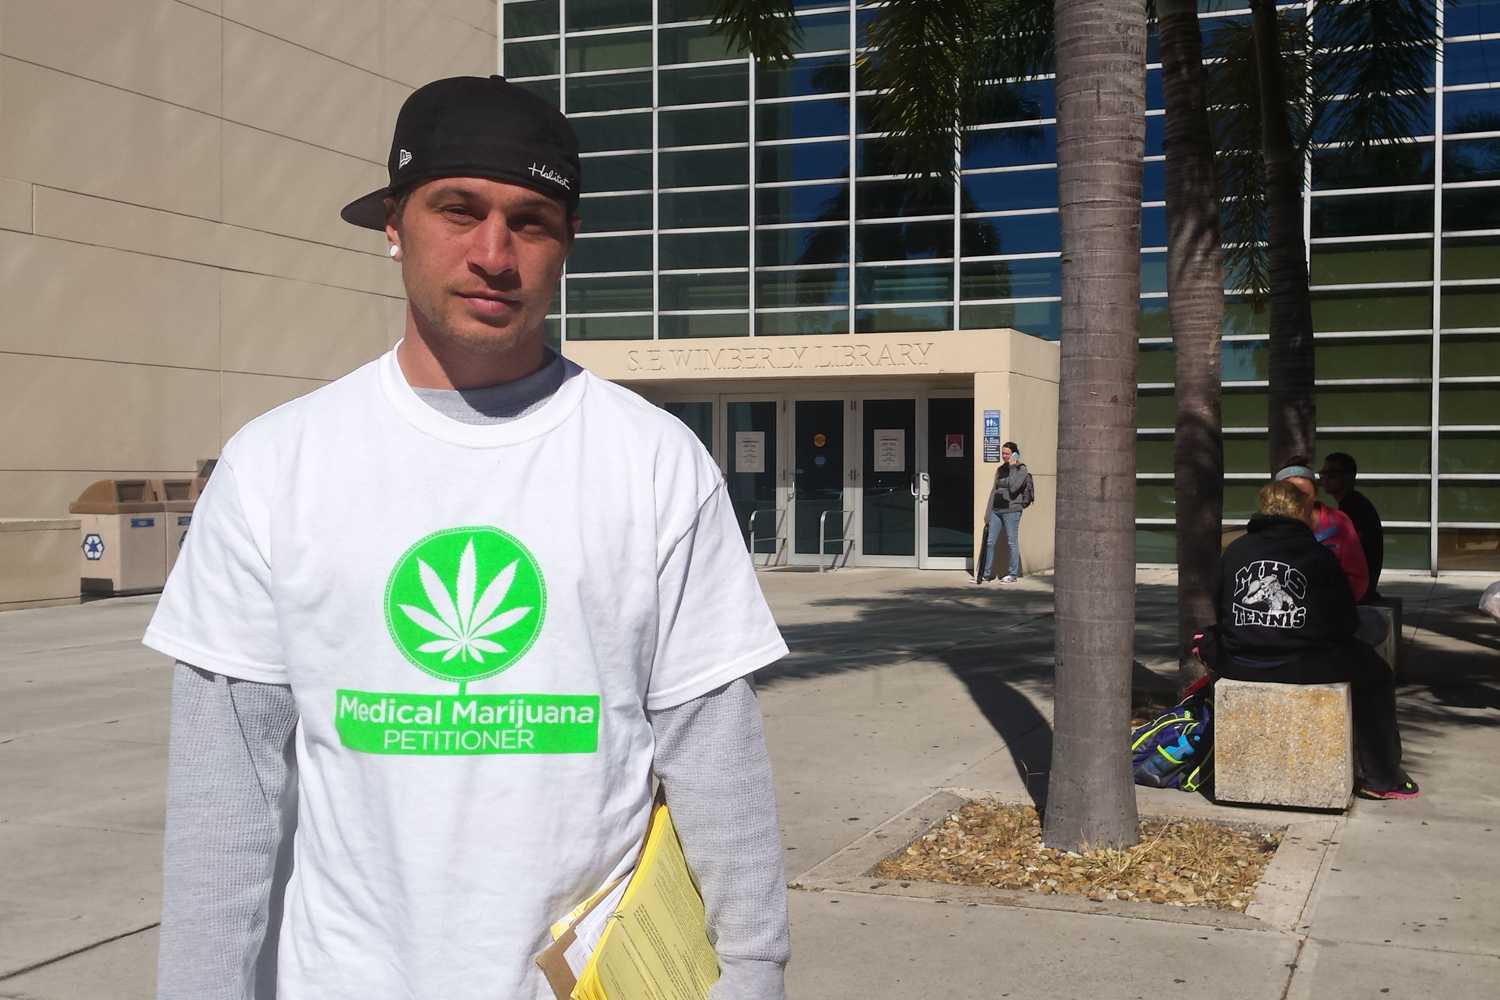 Mike McSherry collects signatures for petitions to place medical marijuana and solar power initiatives on the 2016 election ballot in Florida. Photo by Dylan Bouscher | Contributing Photographer